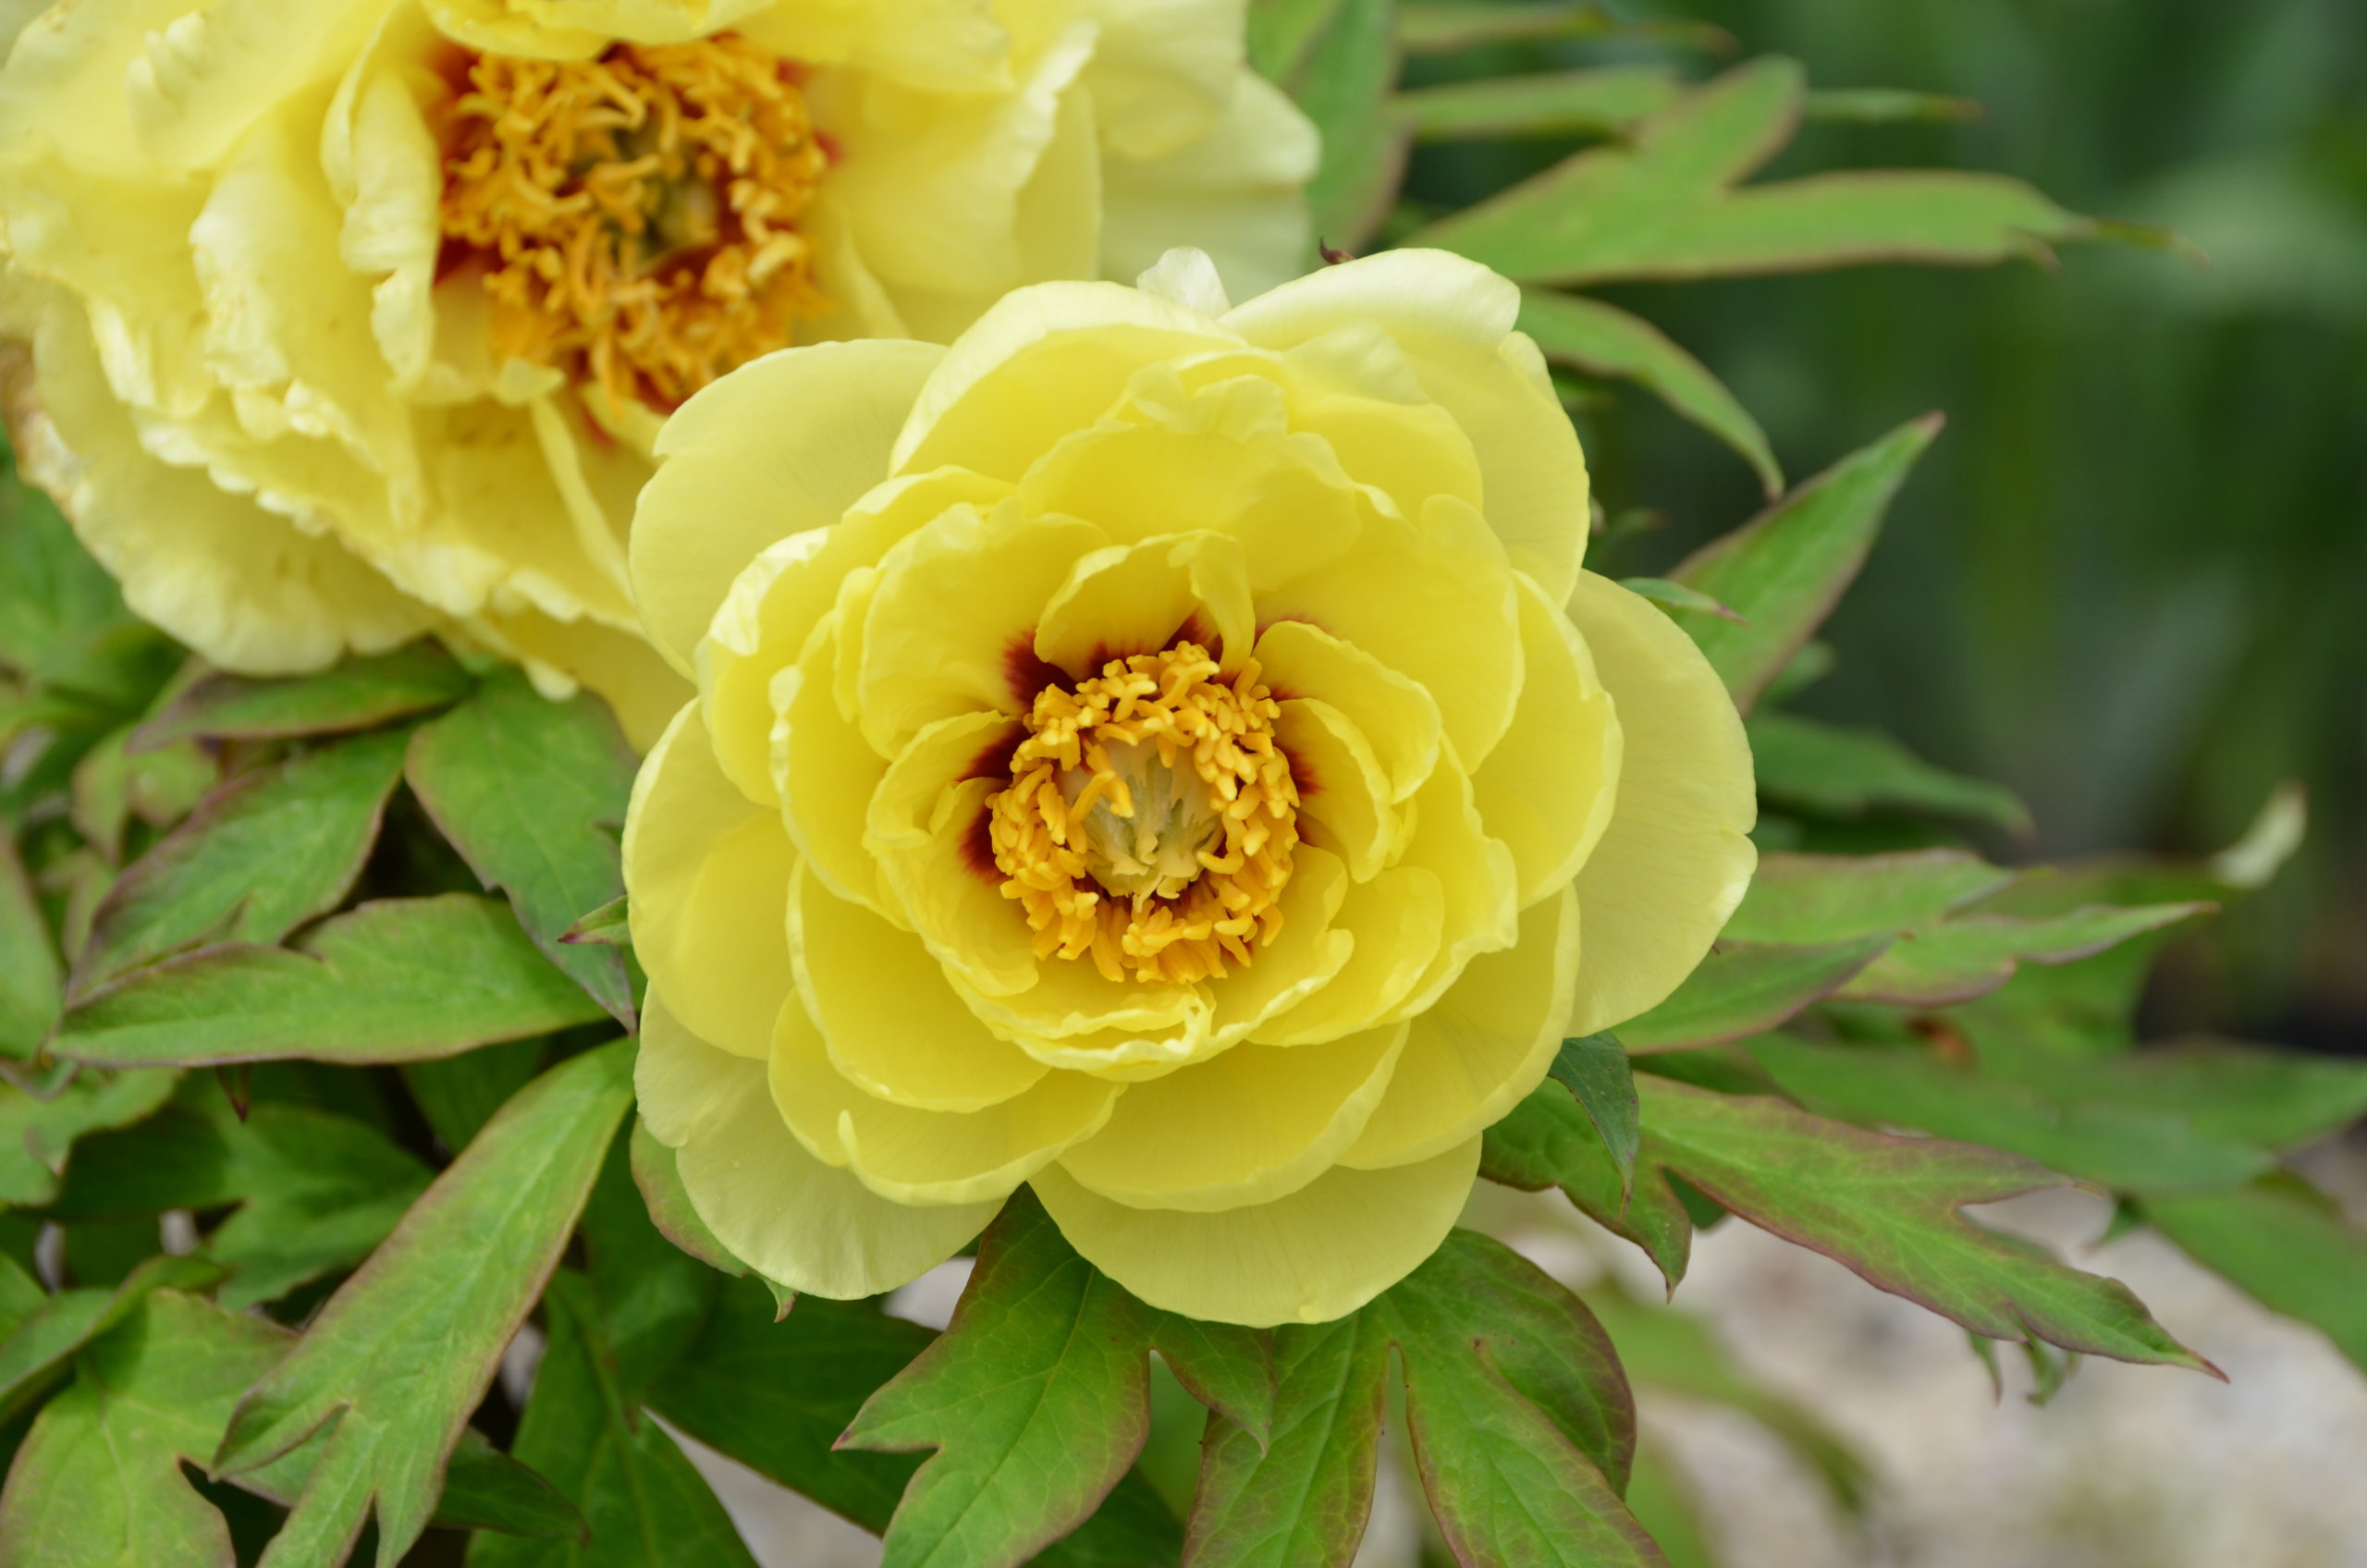 This yellow intersectional peony is Itoh Bartzella flowering in late May and about 36 inches tall.